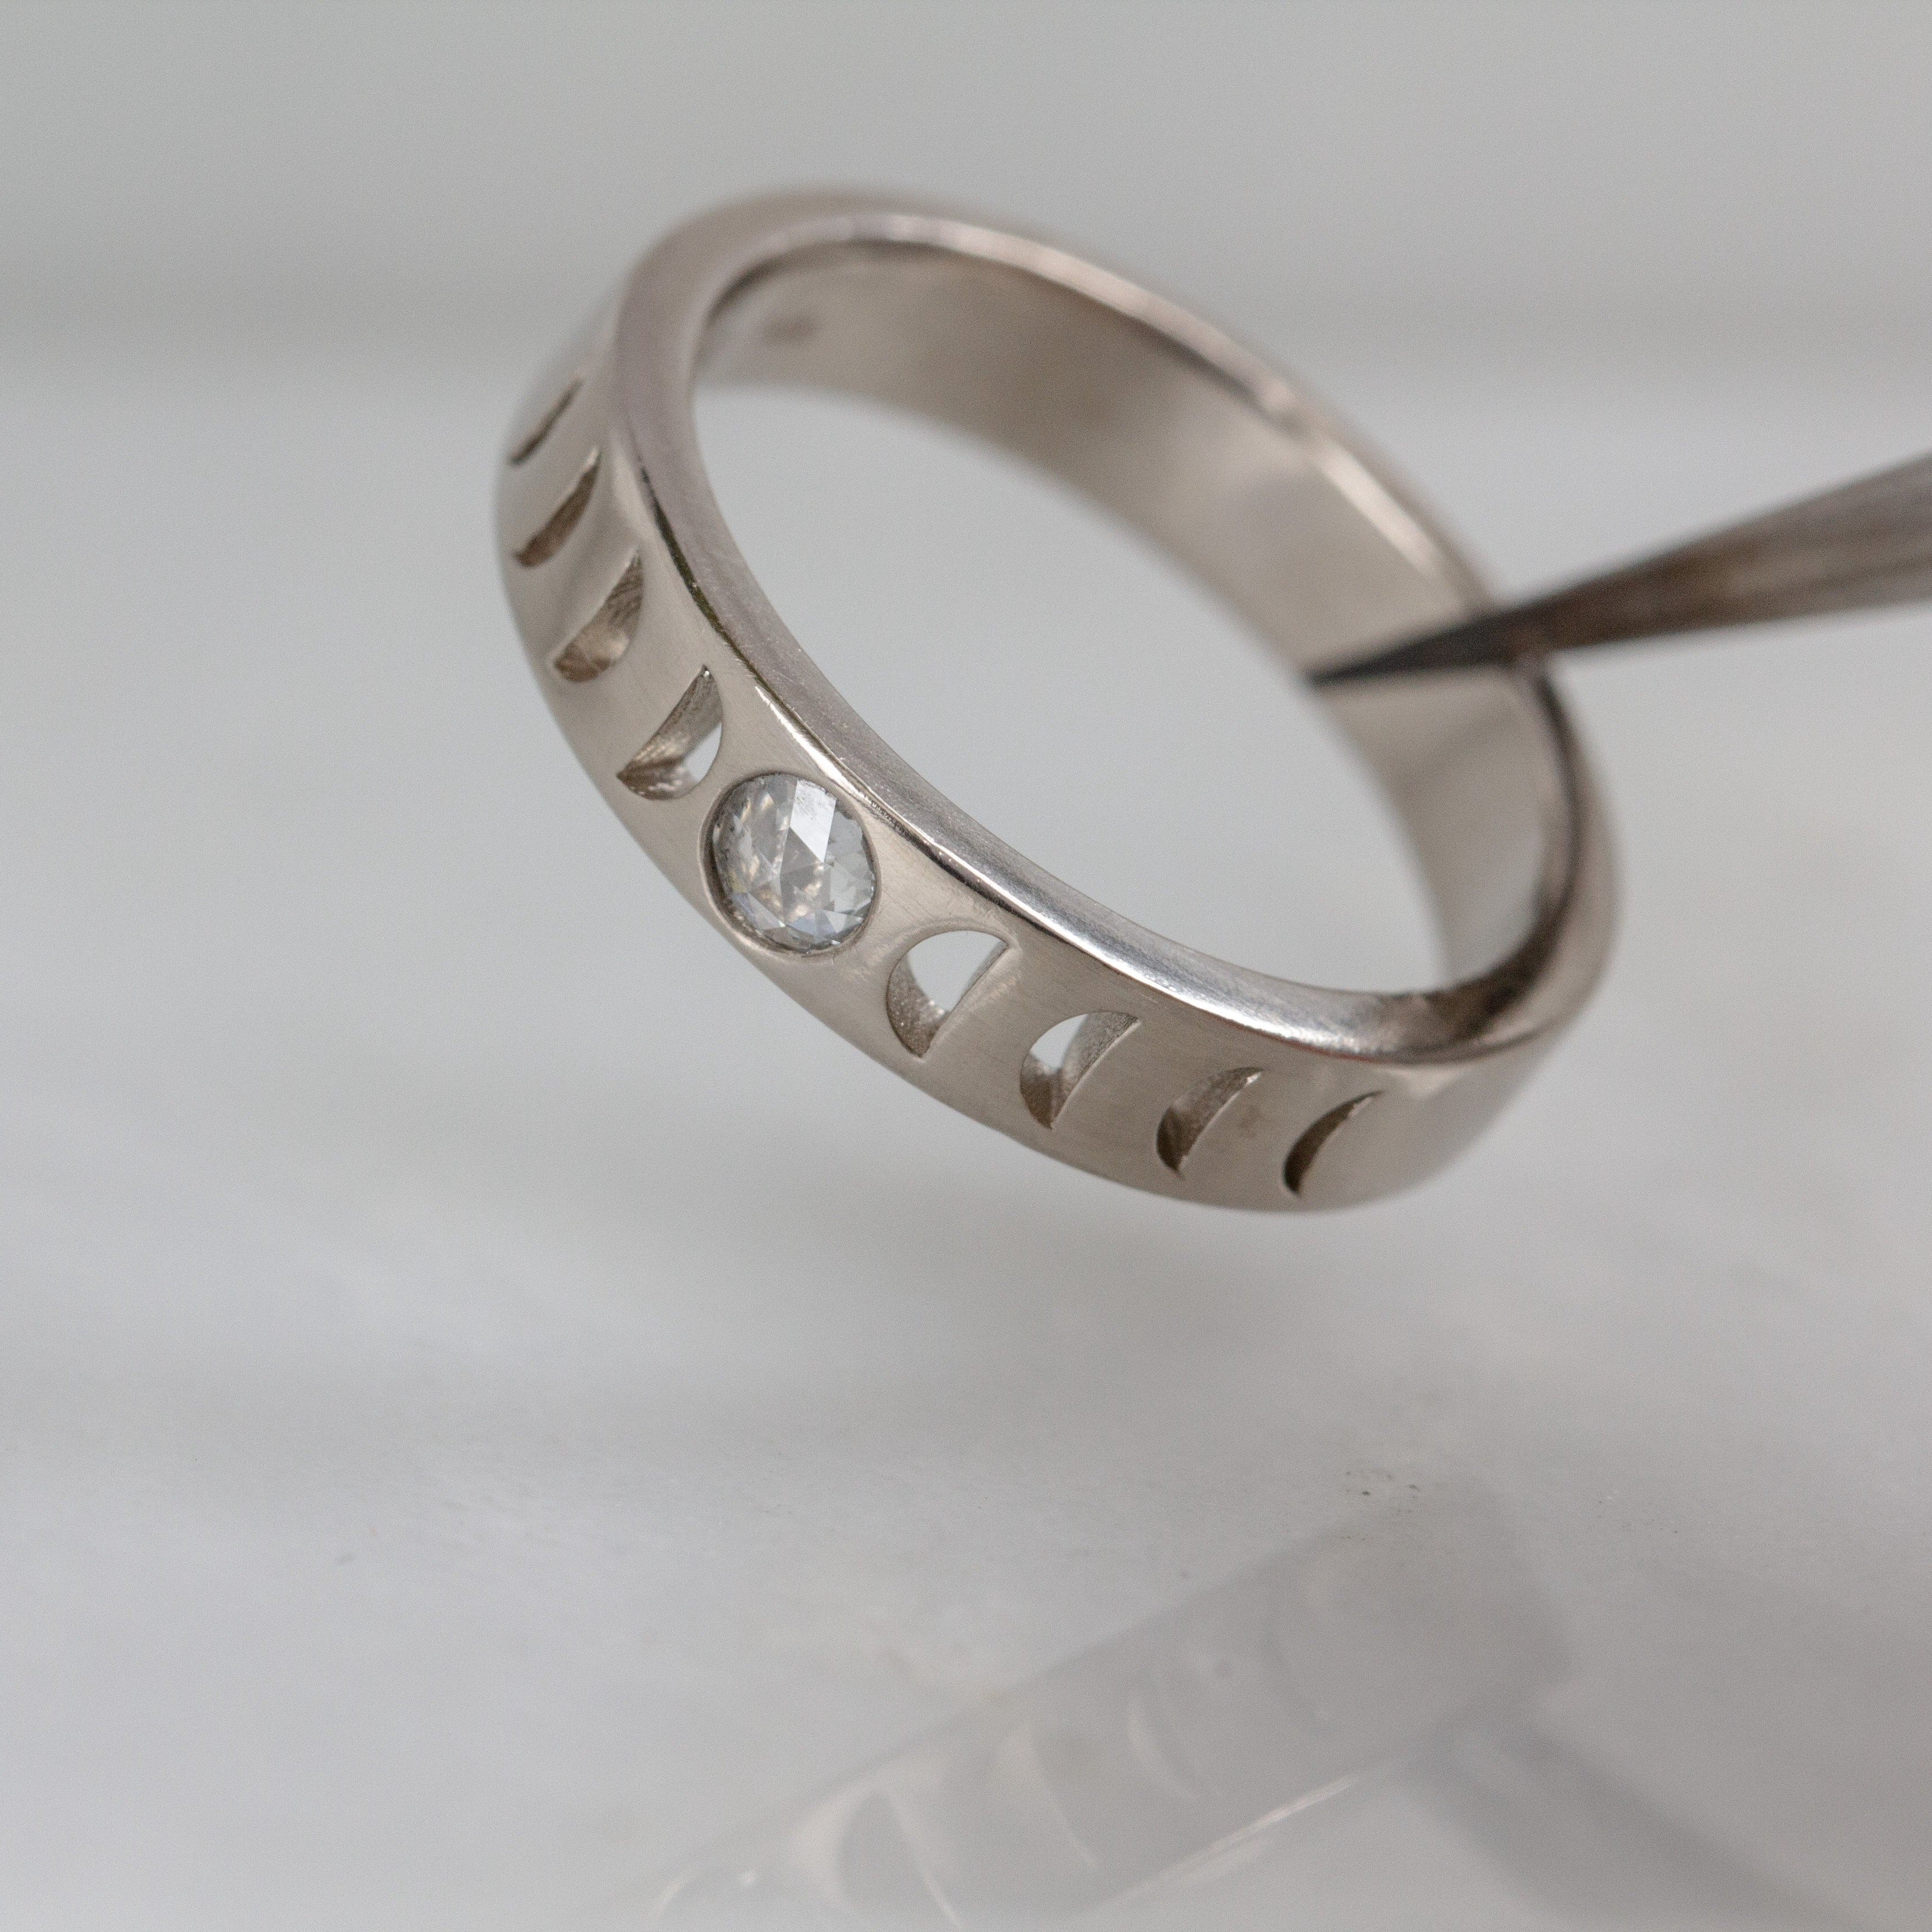 Moon Phase Rings moon phase rings > stacking rings > wedding bands > gender neutral bands > rose cut diamond ring > promise rings >lunar phase ring > moon ring > phases of the moon ring 6 / 14k white gold palladium Moon Phase Ring | 4mm wide | precious white